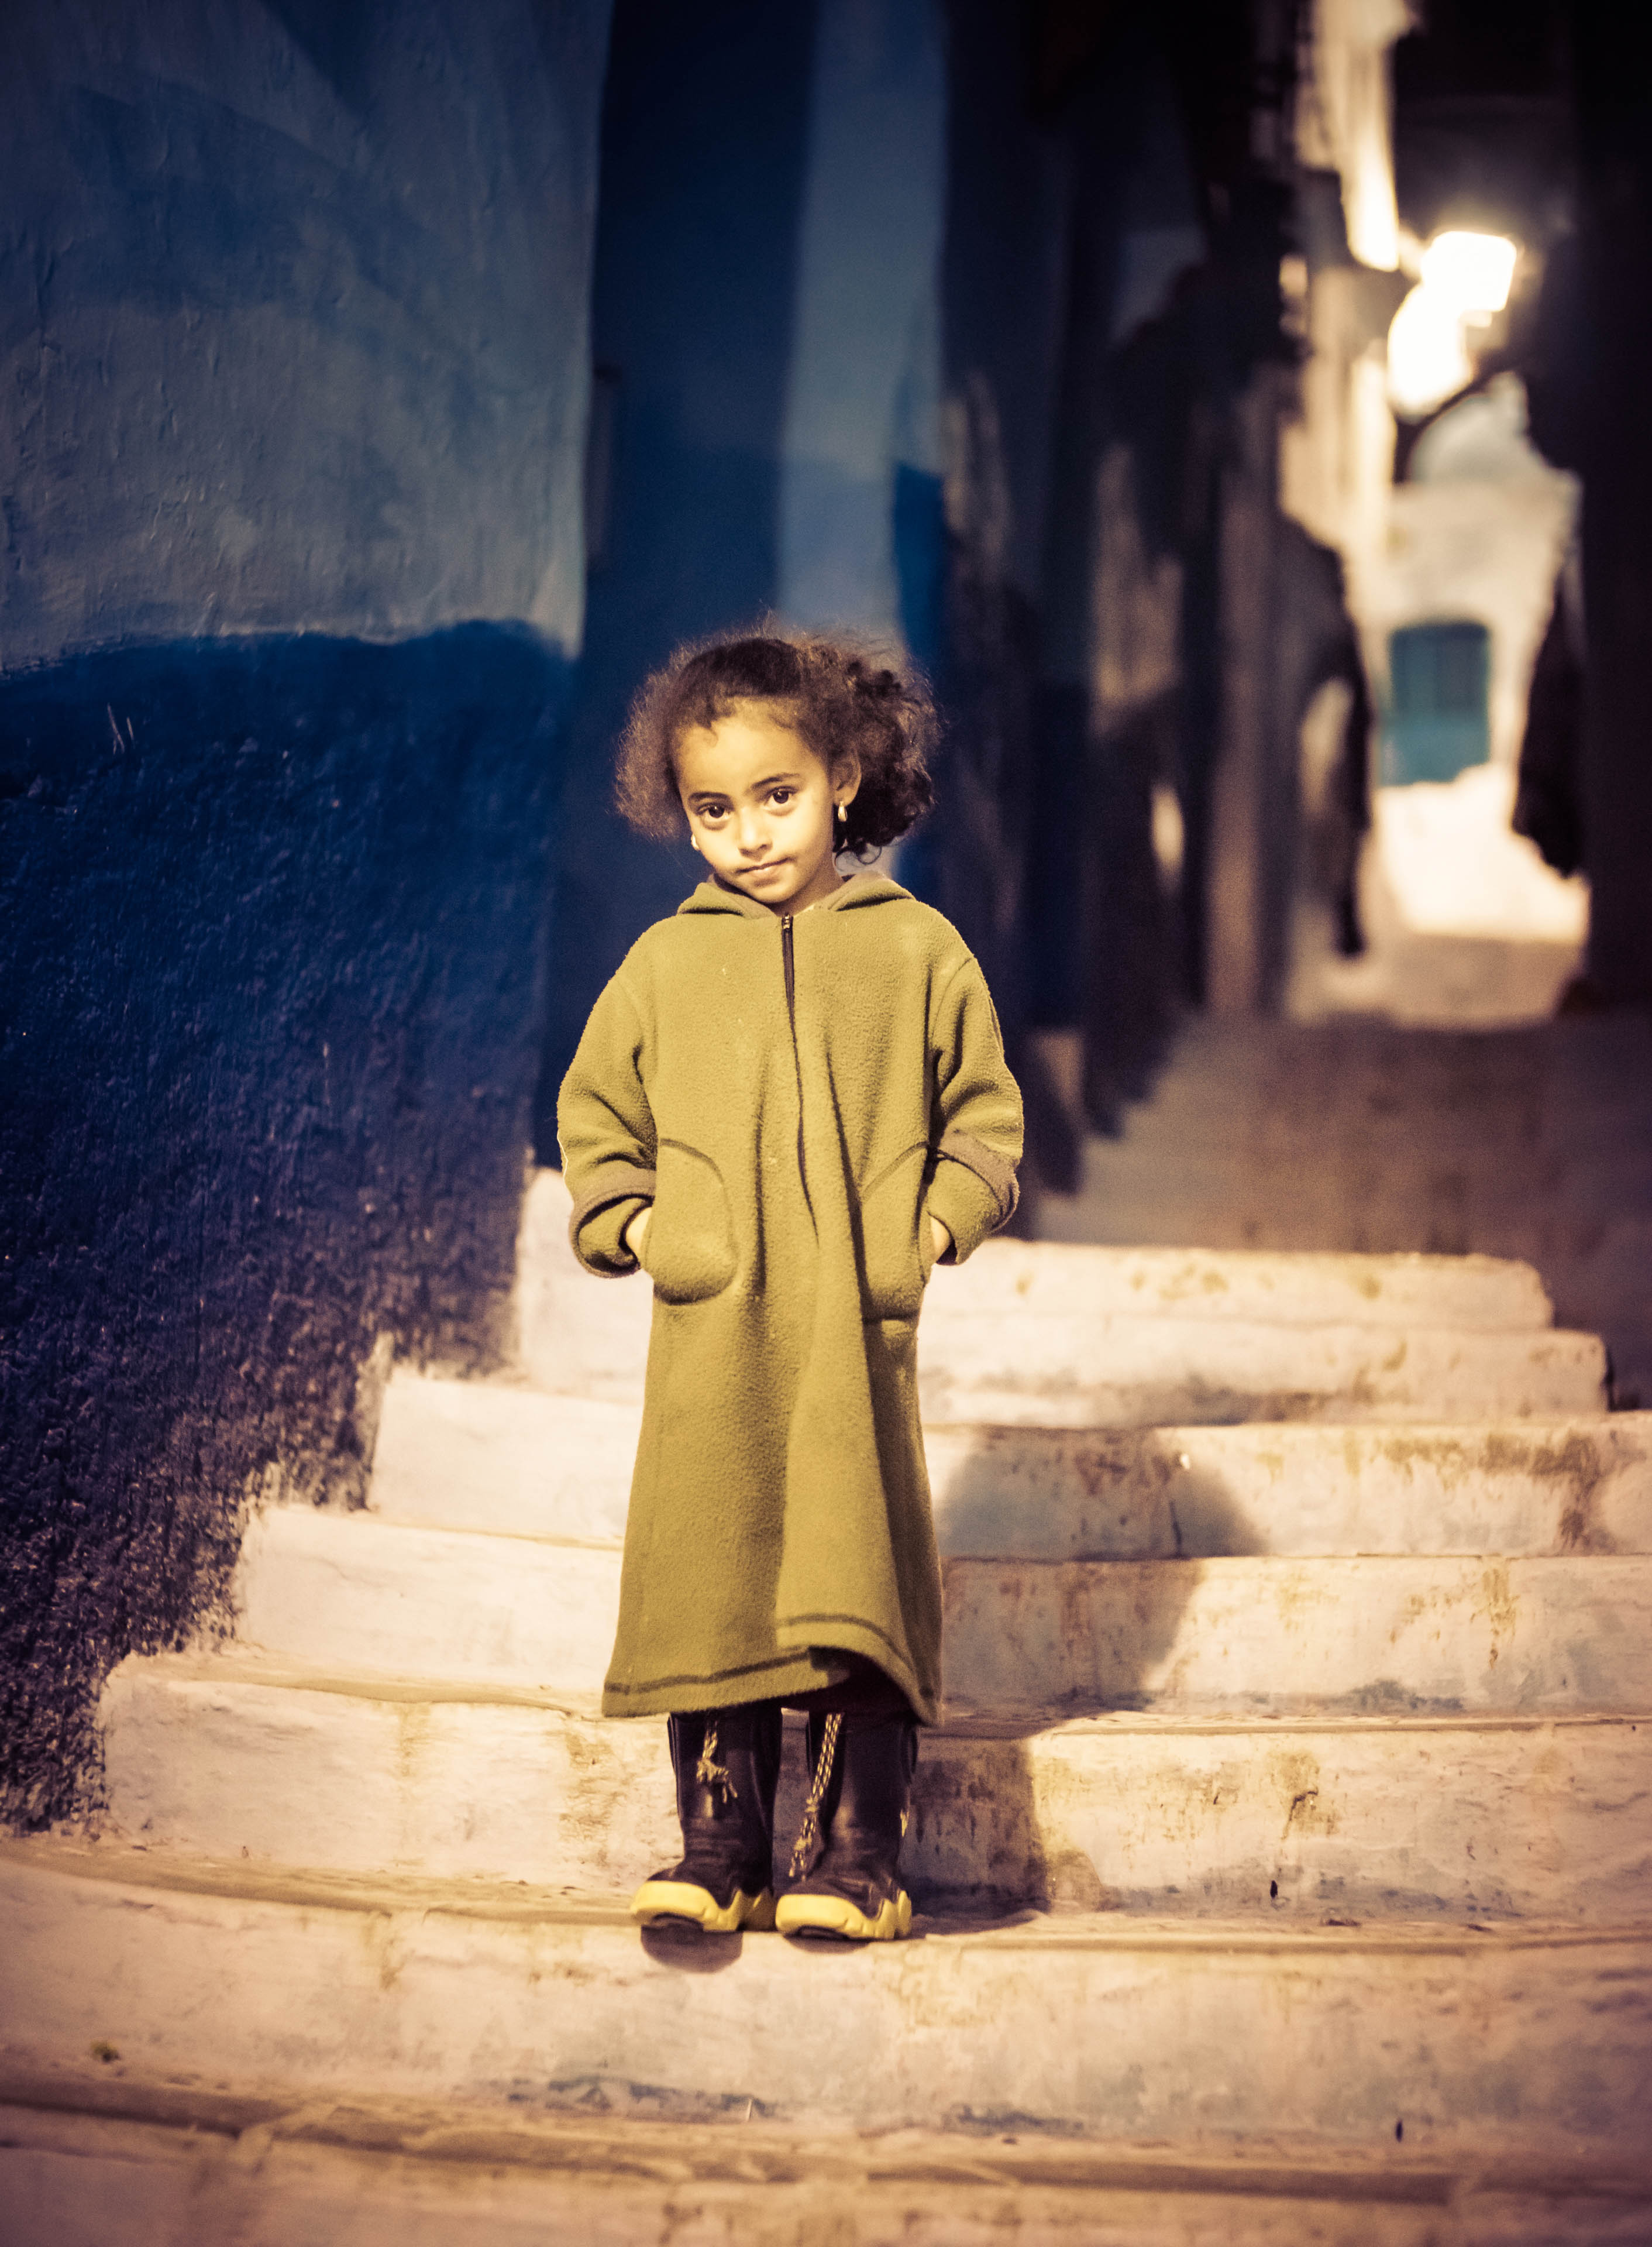 Little Girl in Moroccan Mountain Town #0652